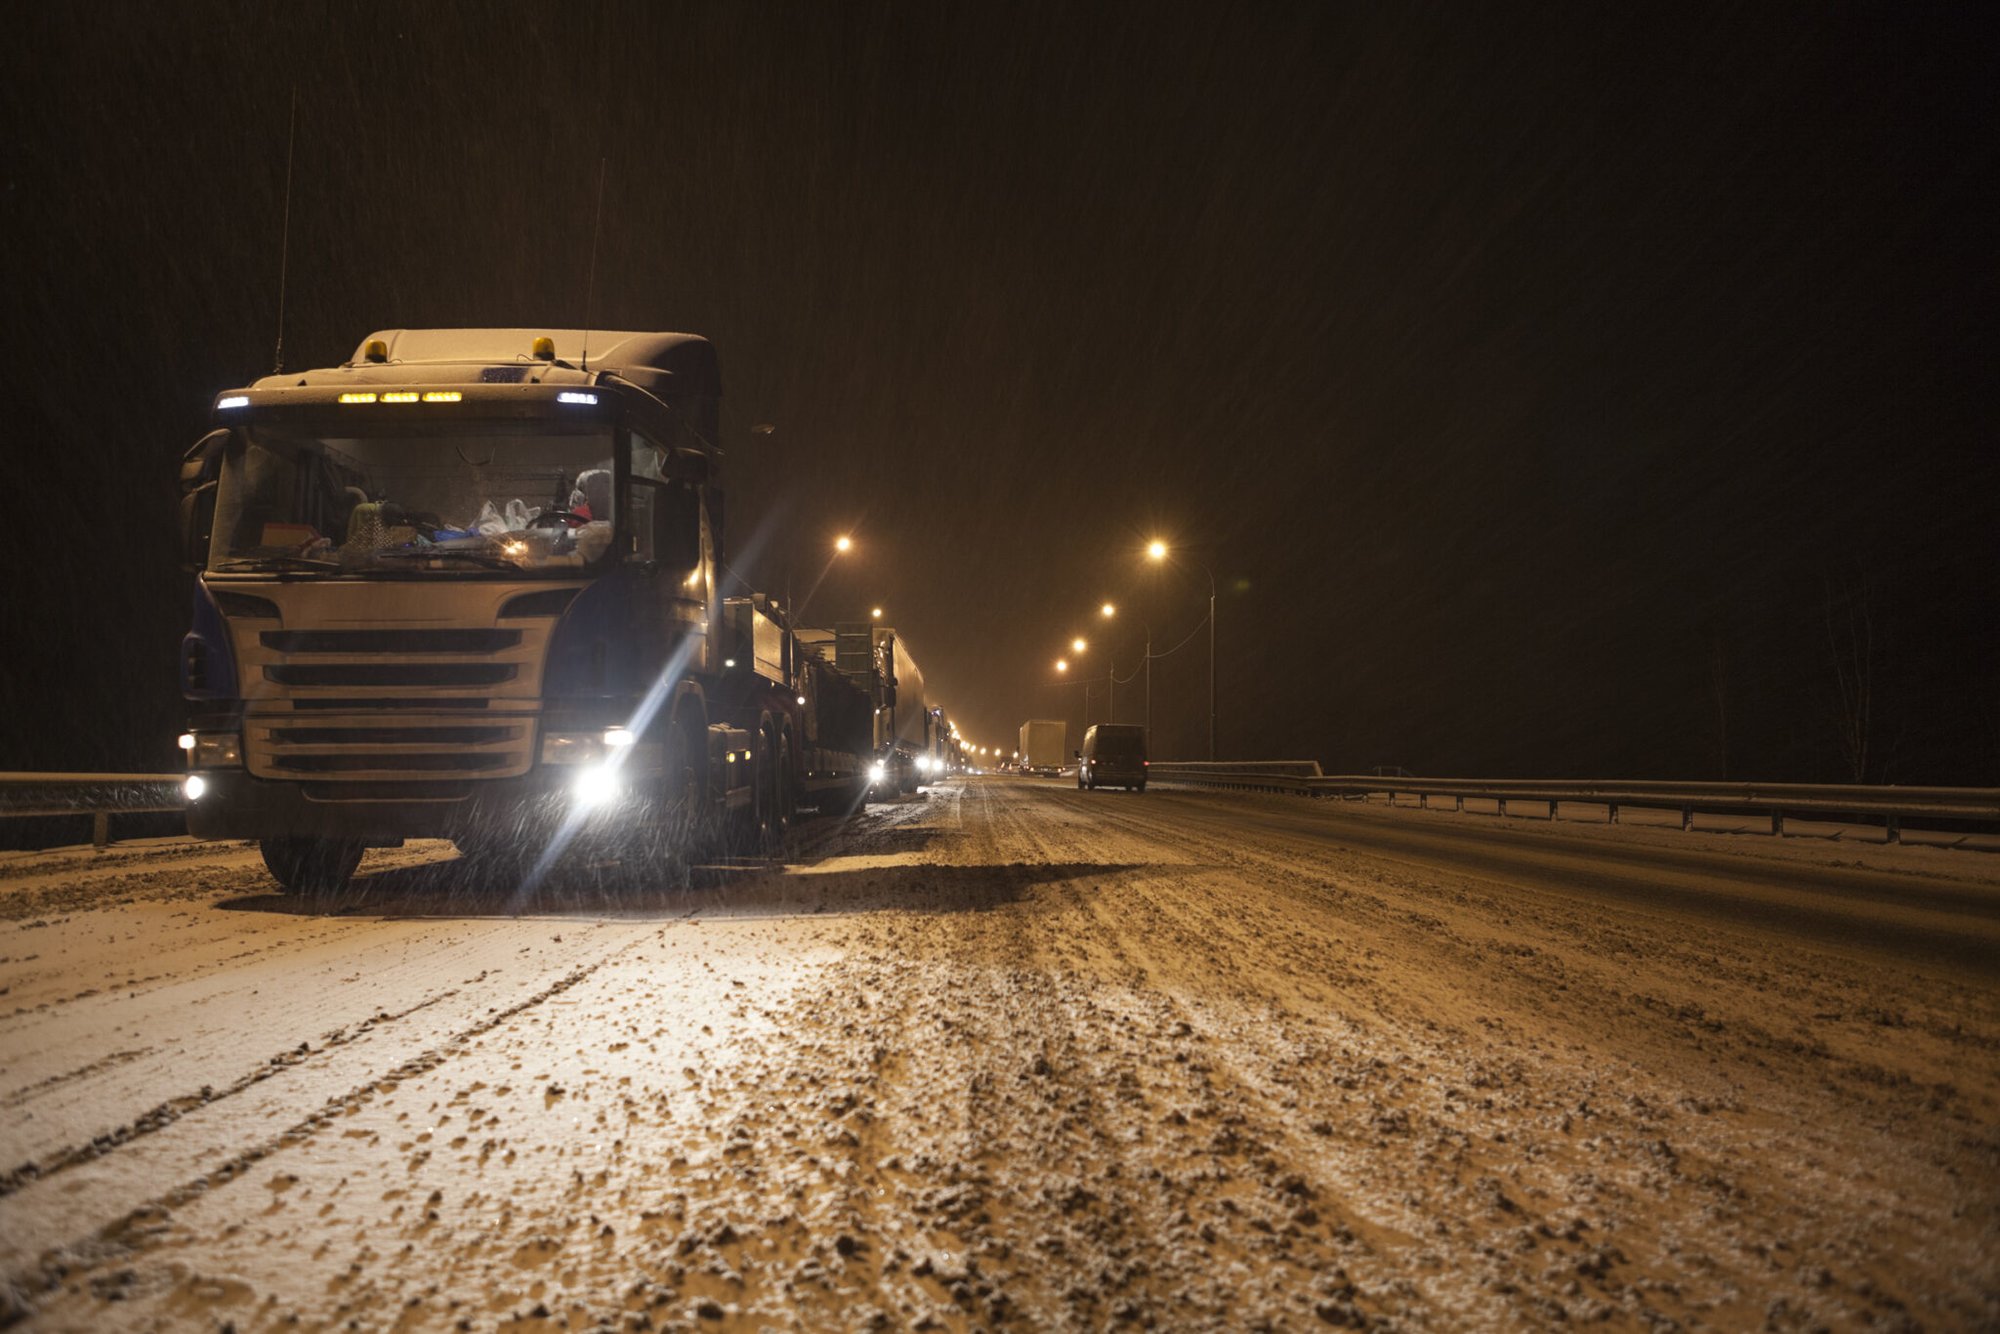 Long traffic jam is on wintry federal road M10 at evening time. Semitrailers standing to Moscow direction due road accident. Snowfall. Russia. Adobe Stock image.